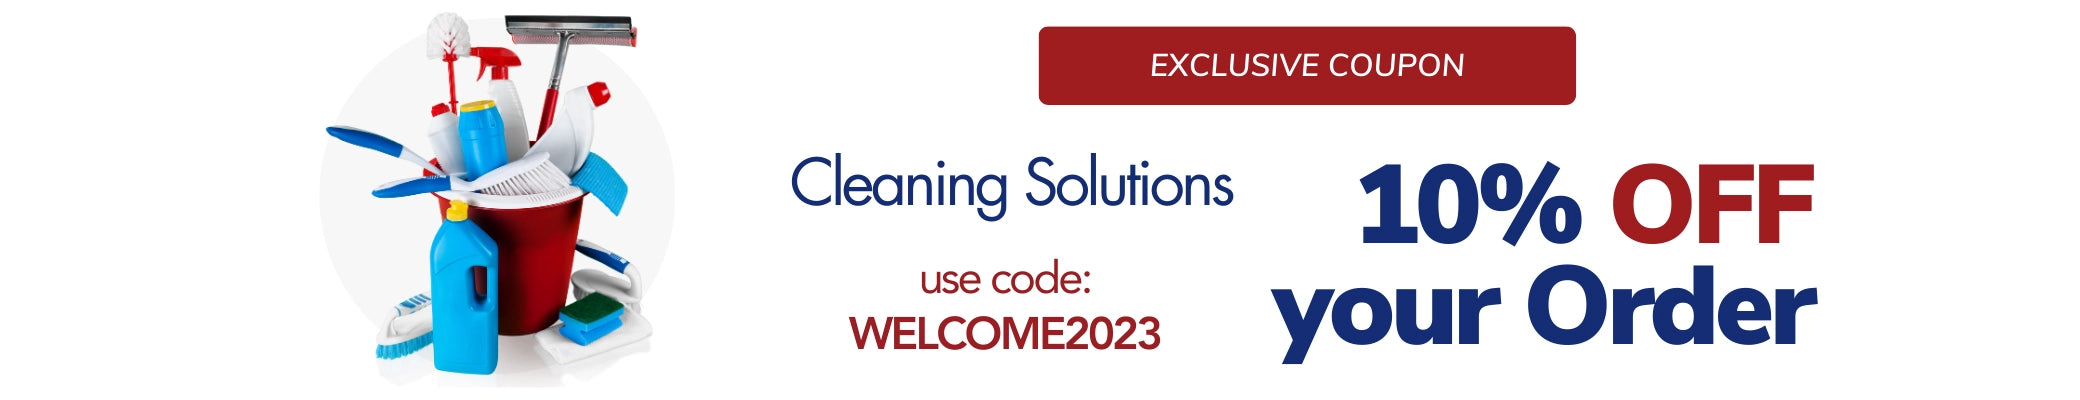 Bleach, mop, and more cleaning solutions with 10%off using the code welcome2023